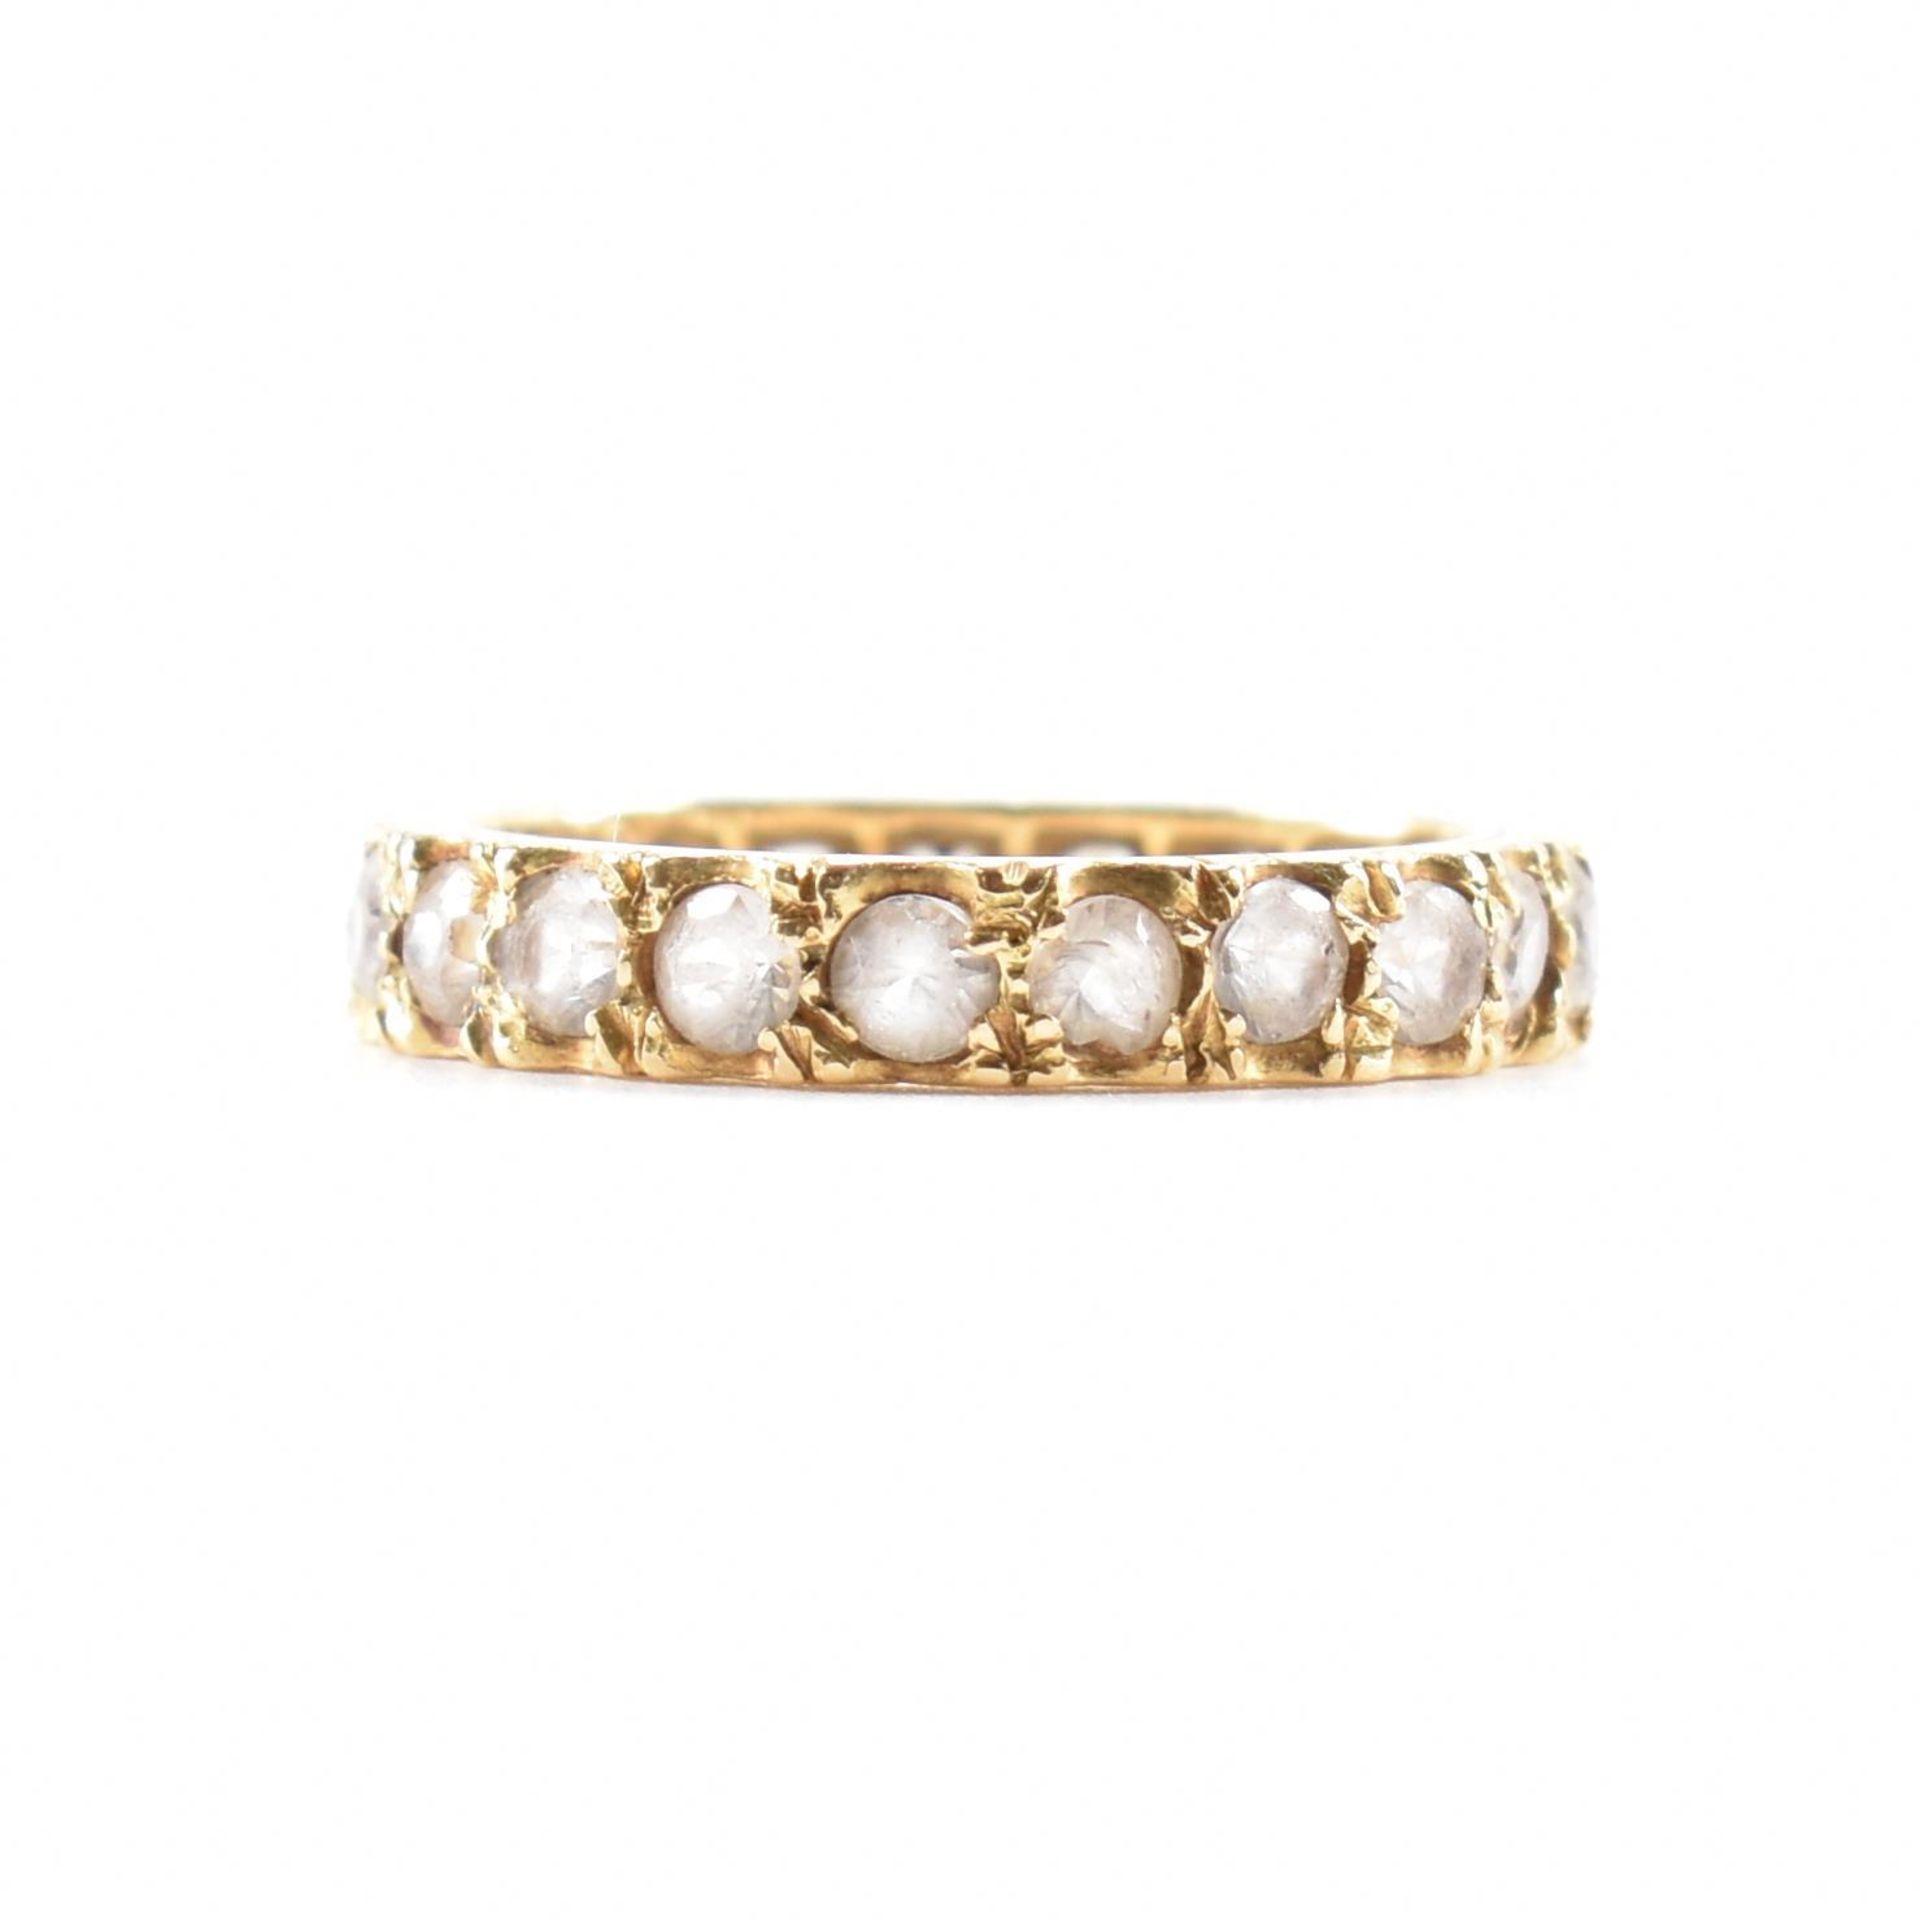 18CT GOLD ETERNITY RING - Image 2 of 6